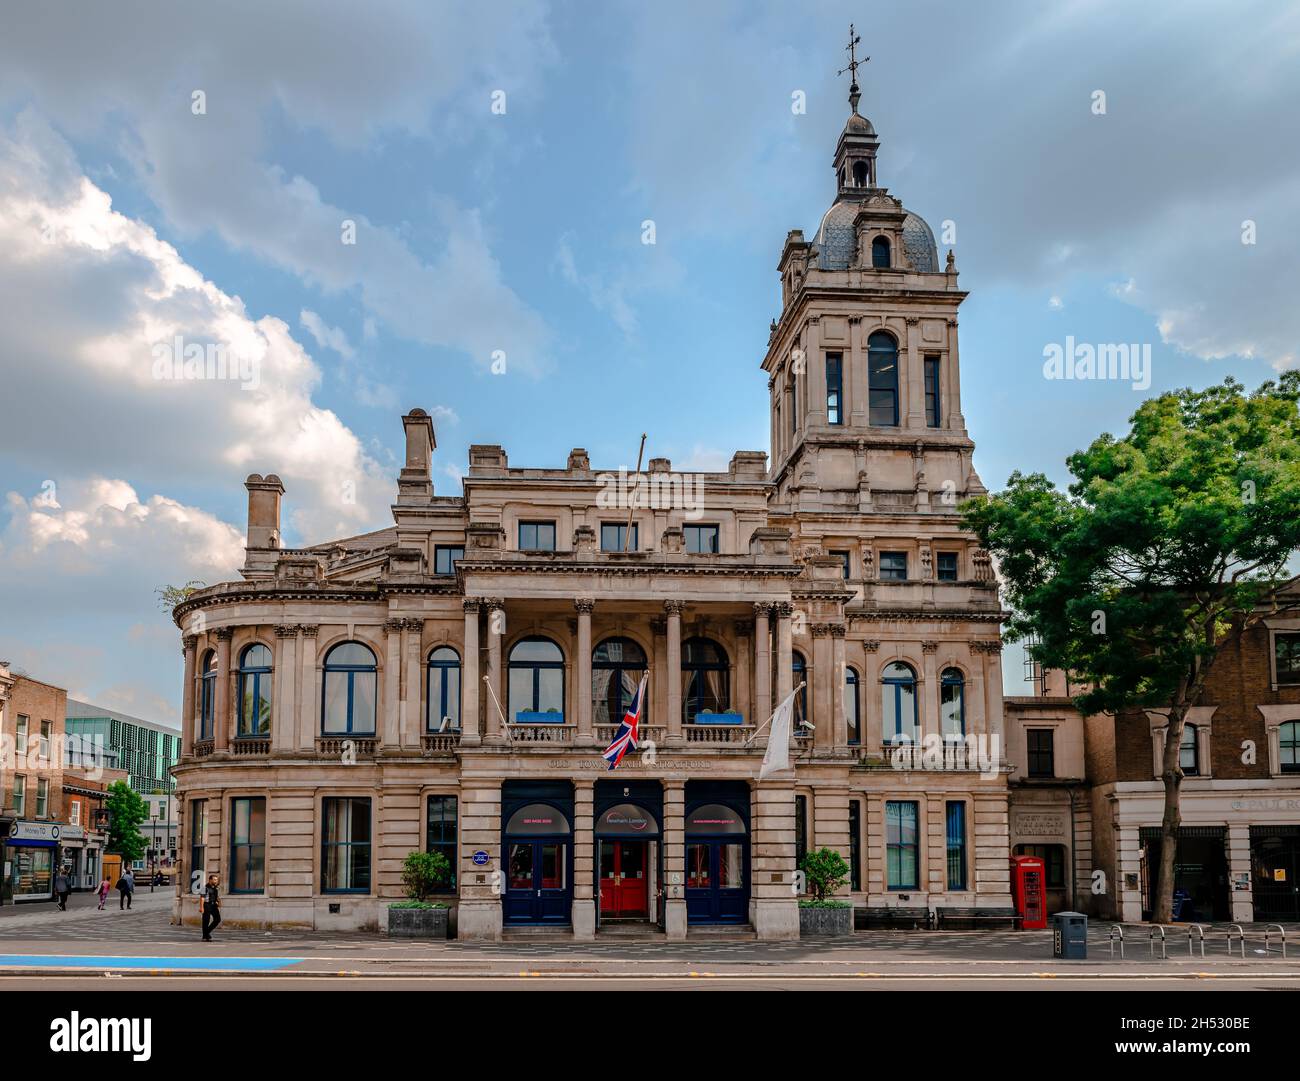 The Stratford Town Hall aka the West Ham Old Town Hall, in Stratford Broadway, Stratford, Newham, Greater London. Grade II listed , Italianate style. Stock Photo